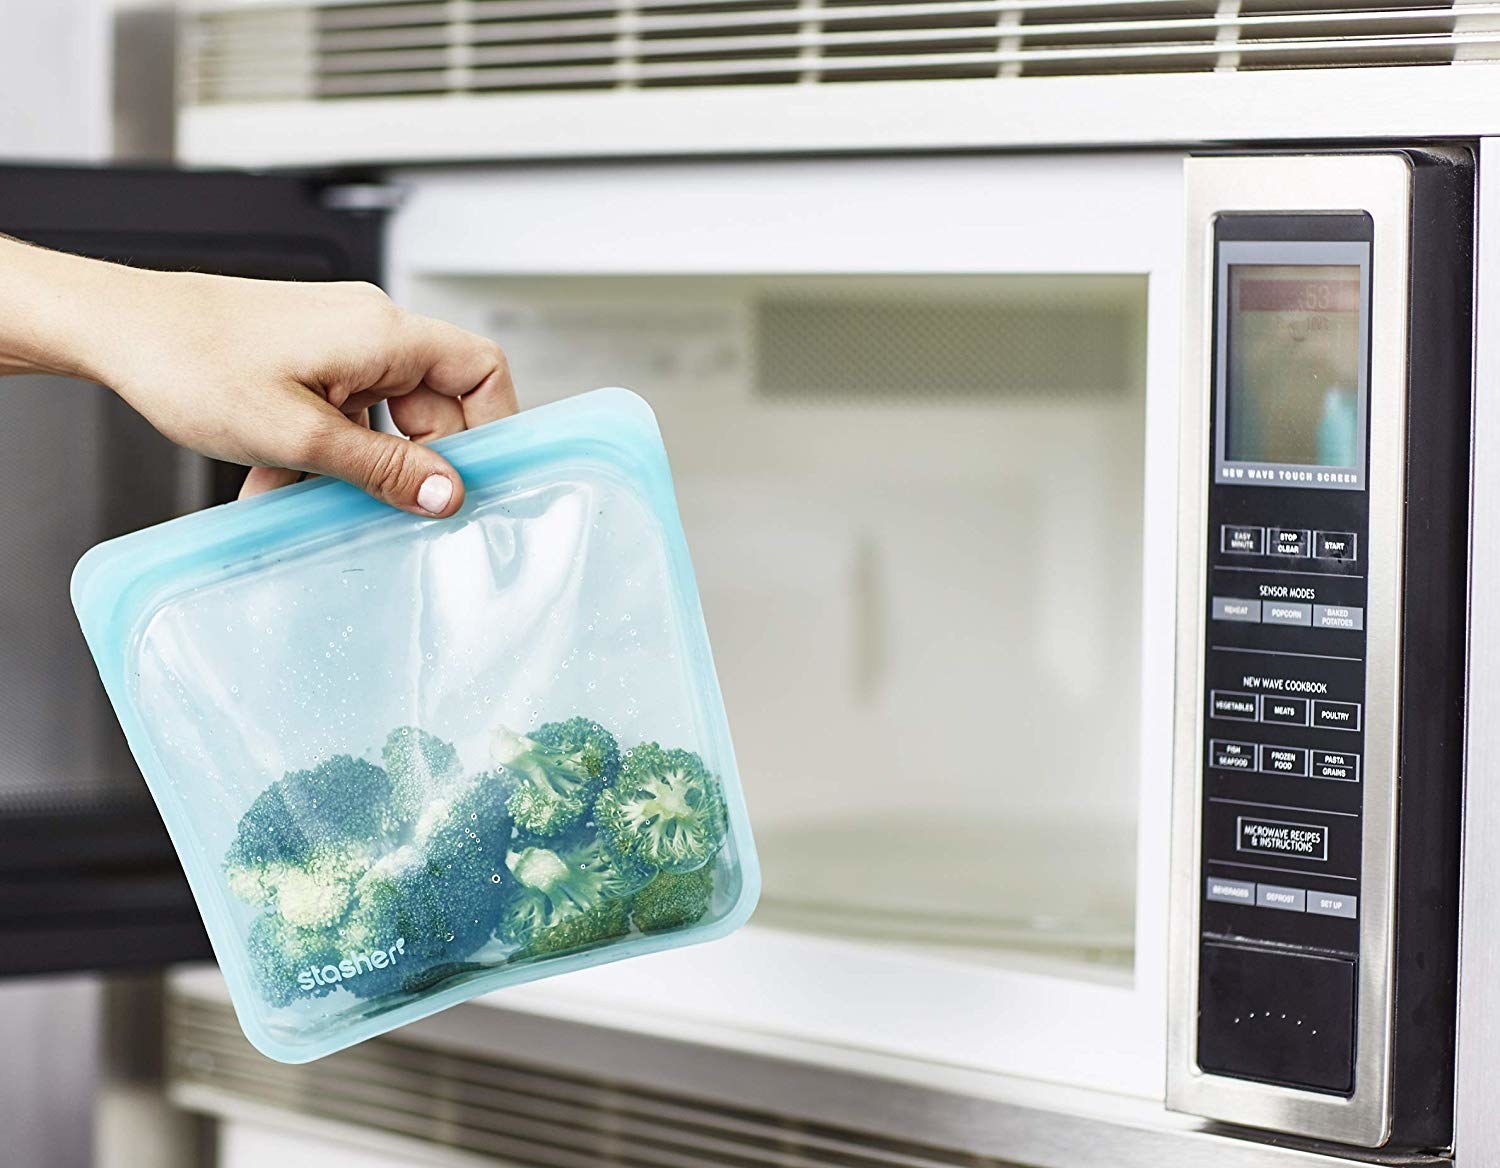 model&#x27;s hand puts clear blue stasher bag full of broccoli into microwave